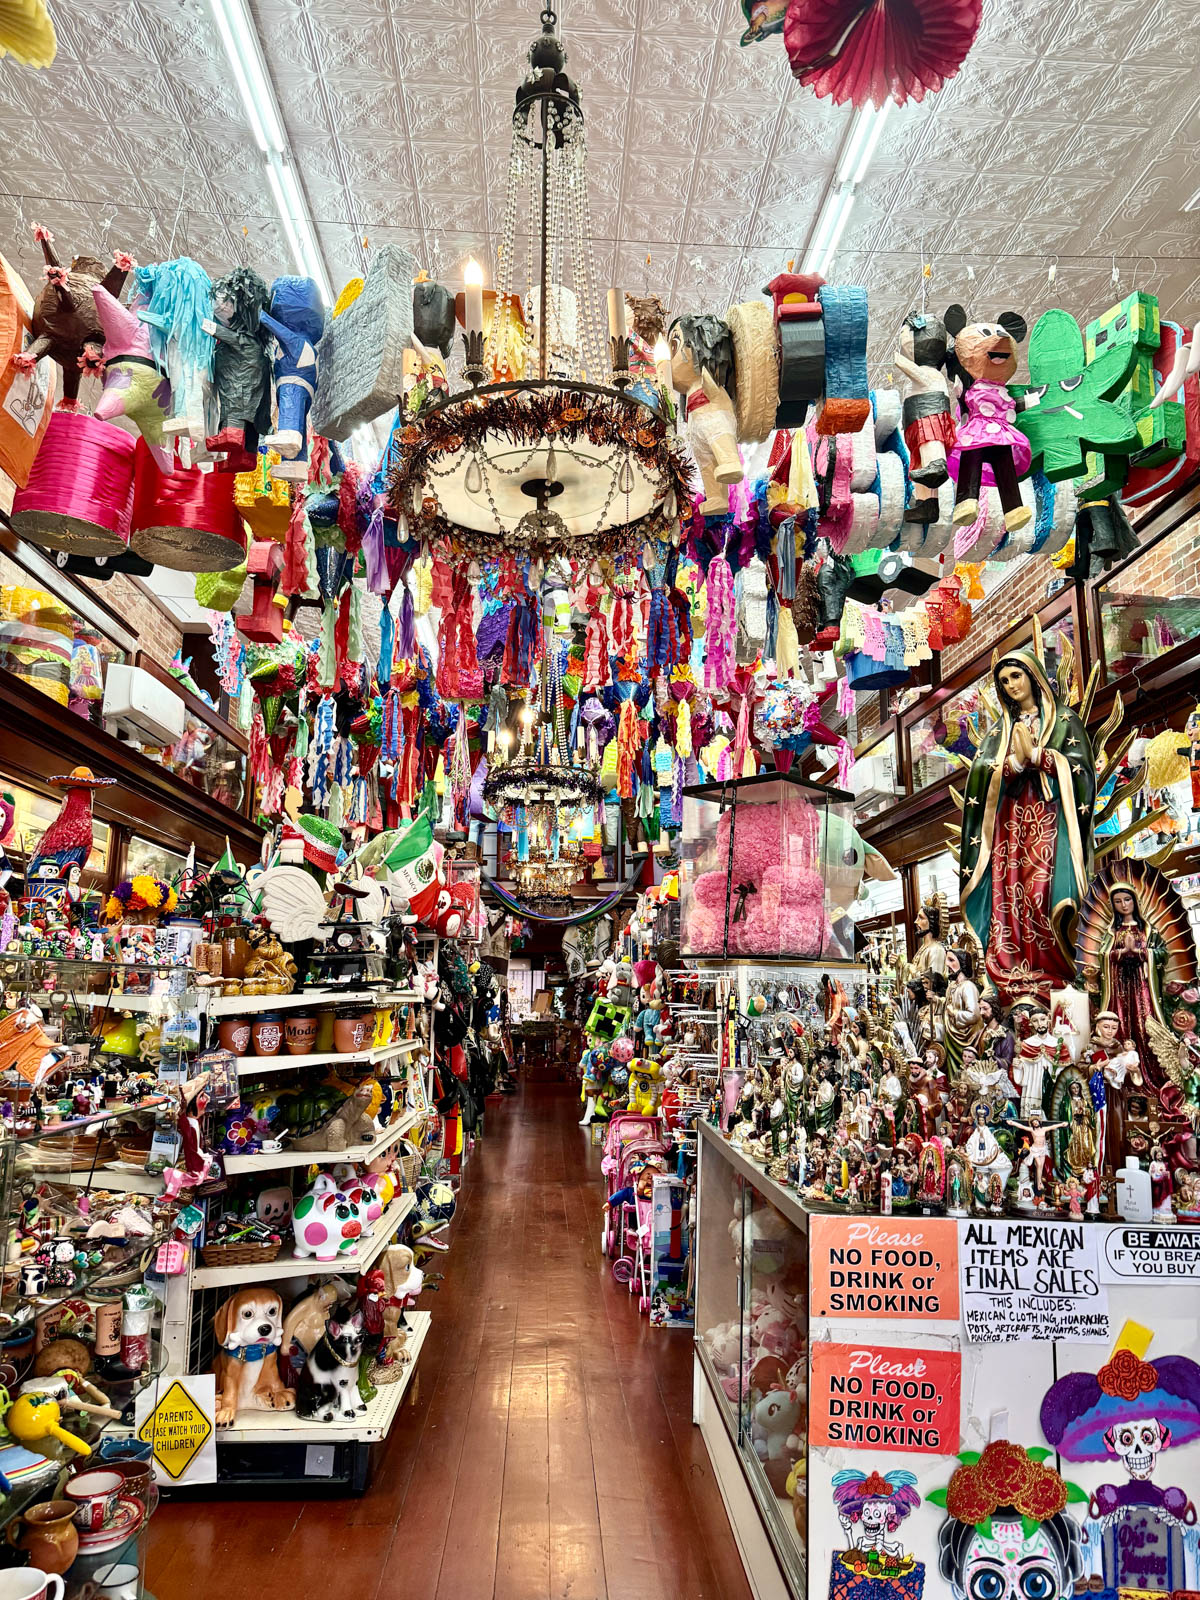 Inside of a store with full shelves and items hanging from ceiling.